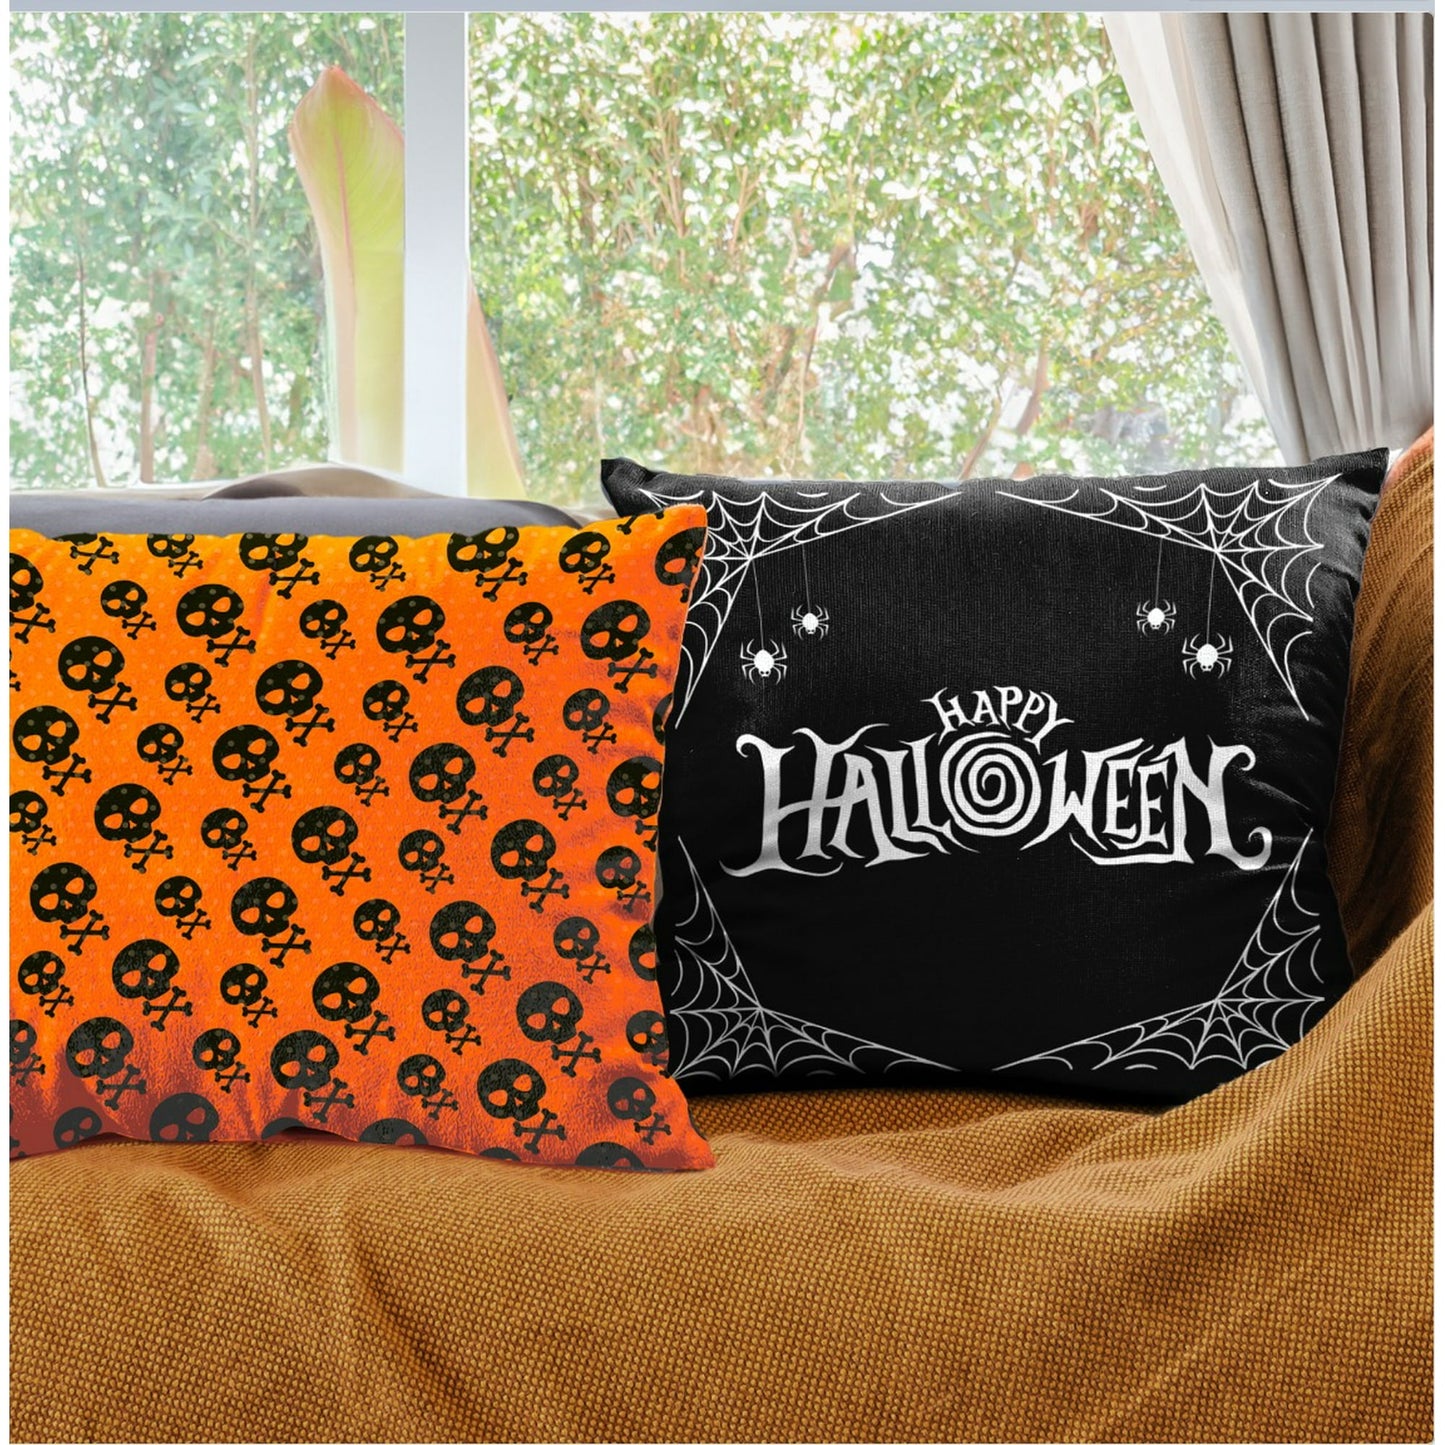 A pair of Halloween pumpkin pattern pillows with the text "Happy Halloween" printed on them.